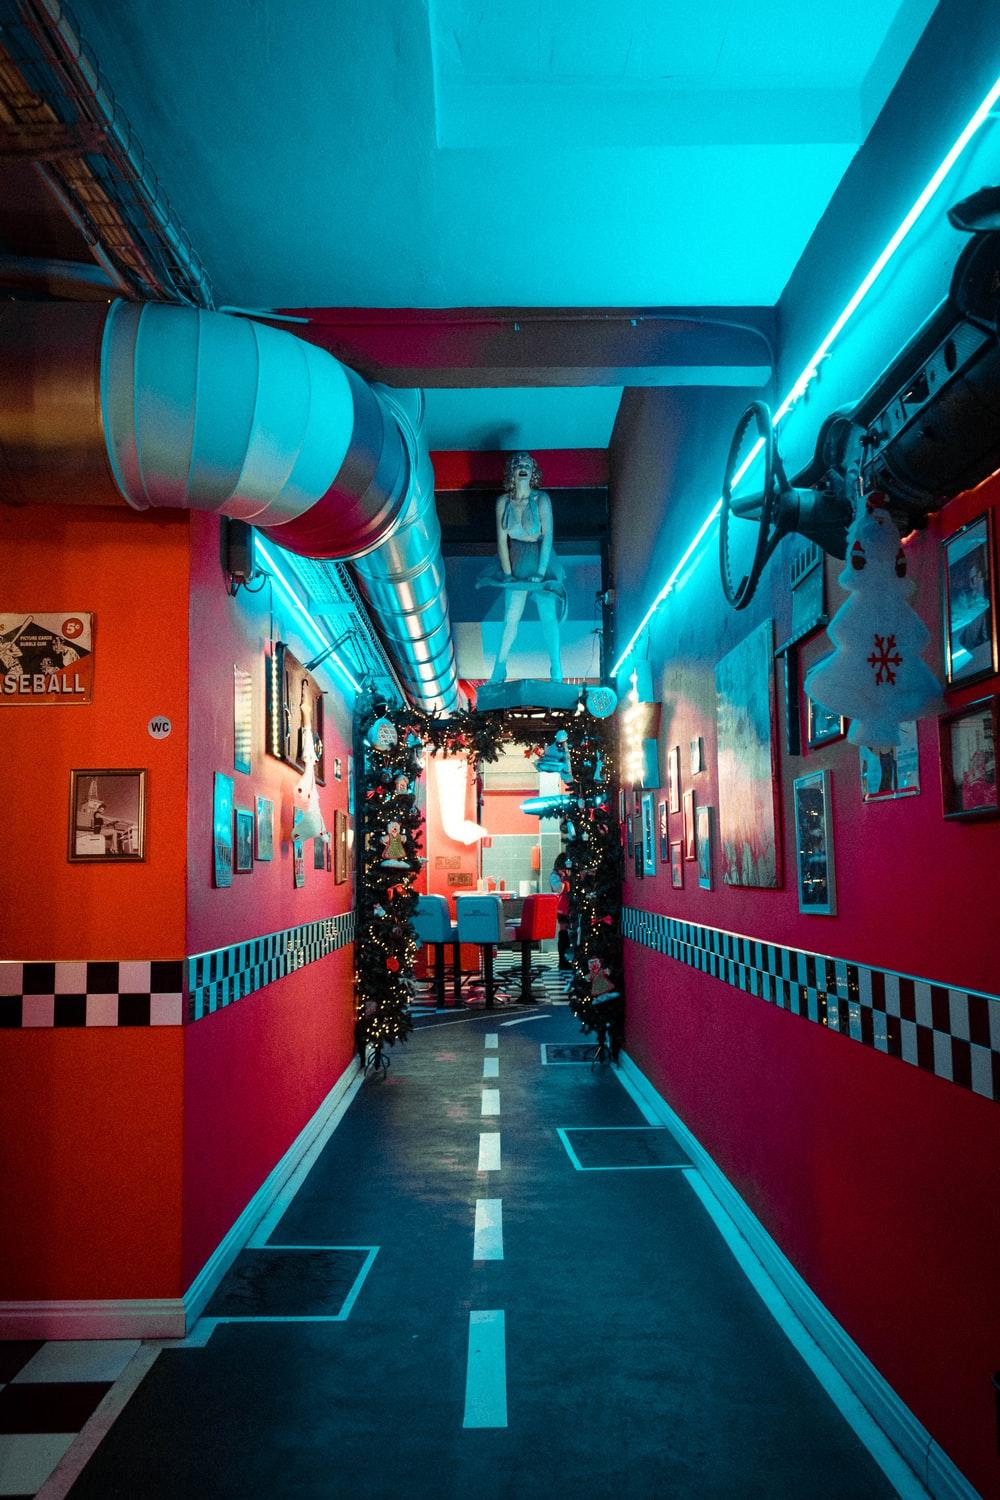 50S Diner Picture. Download Free Image